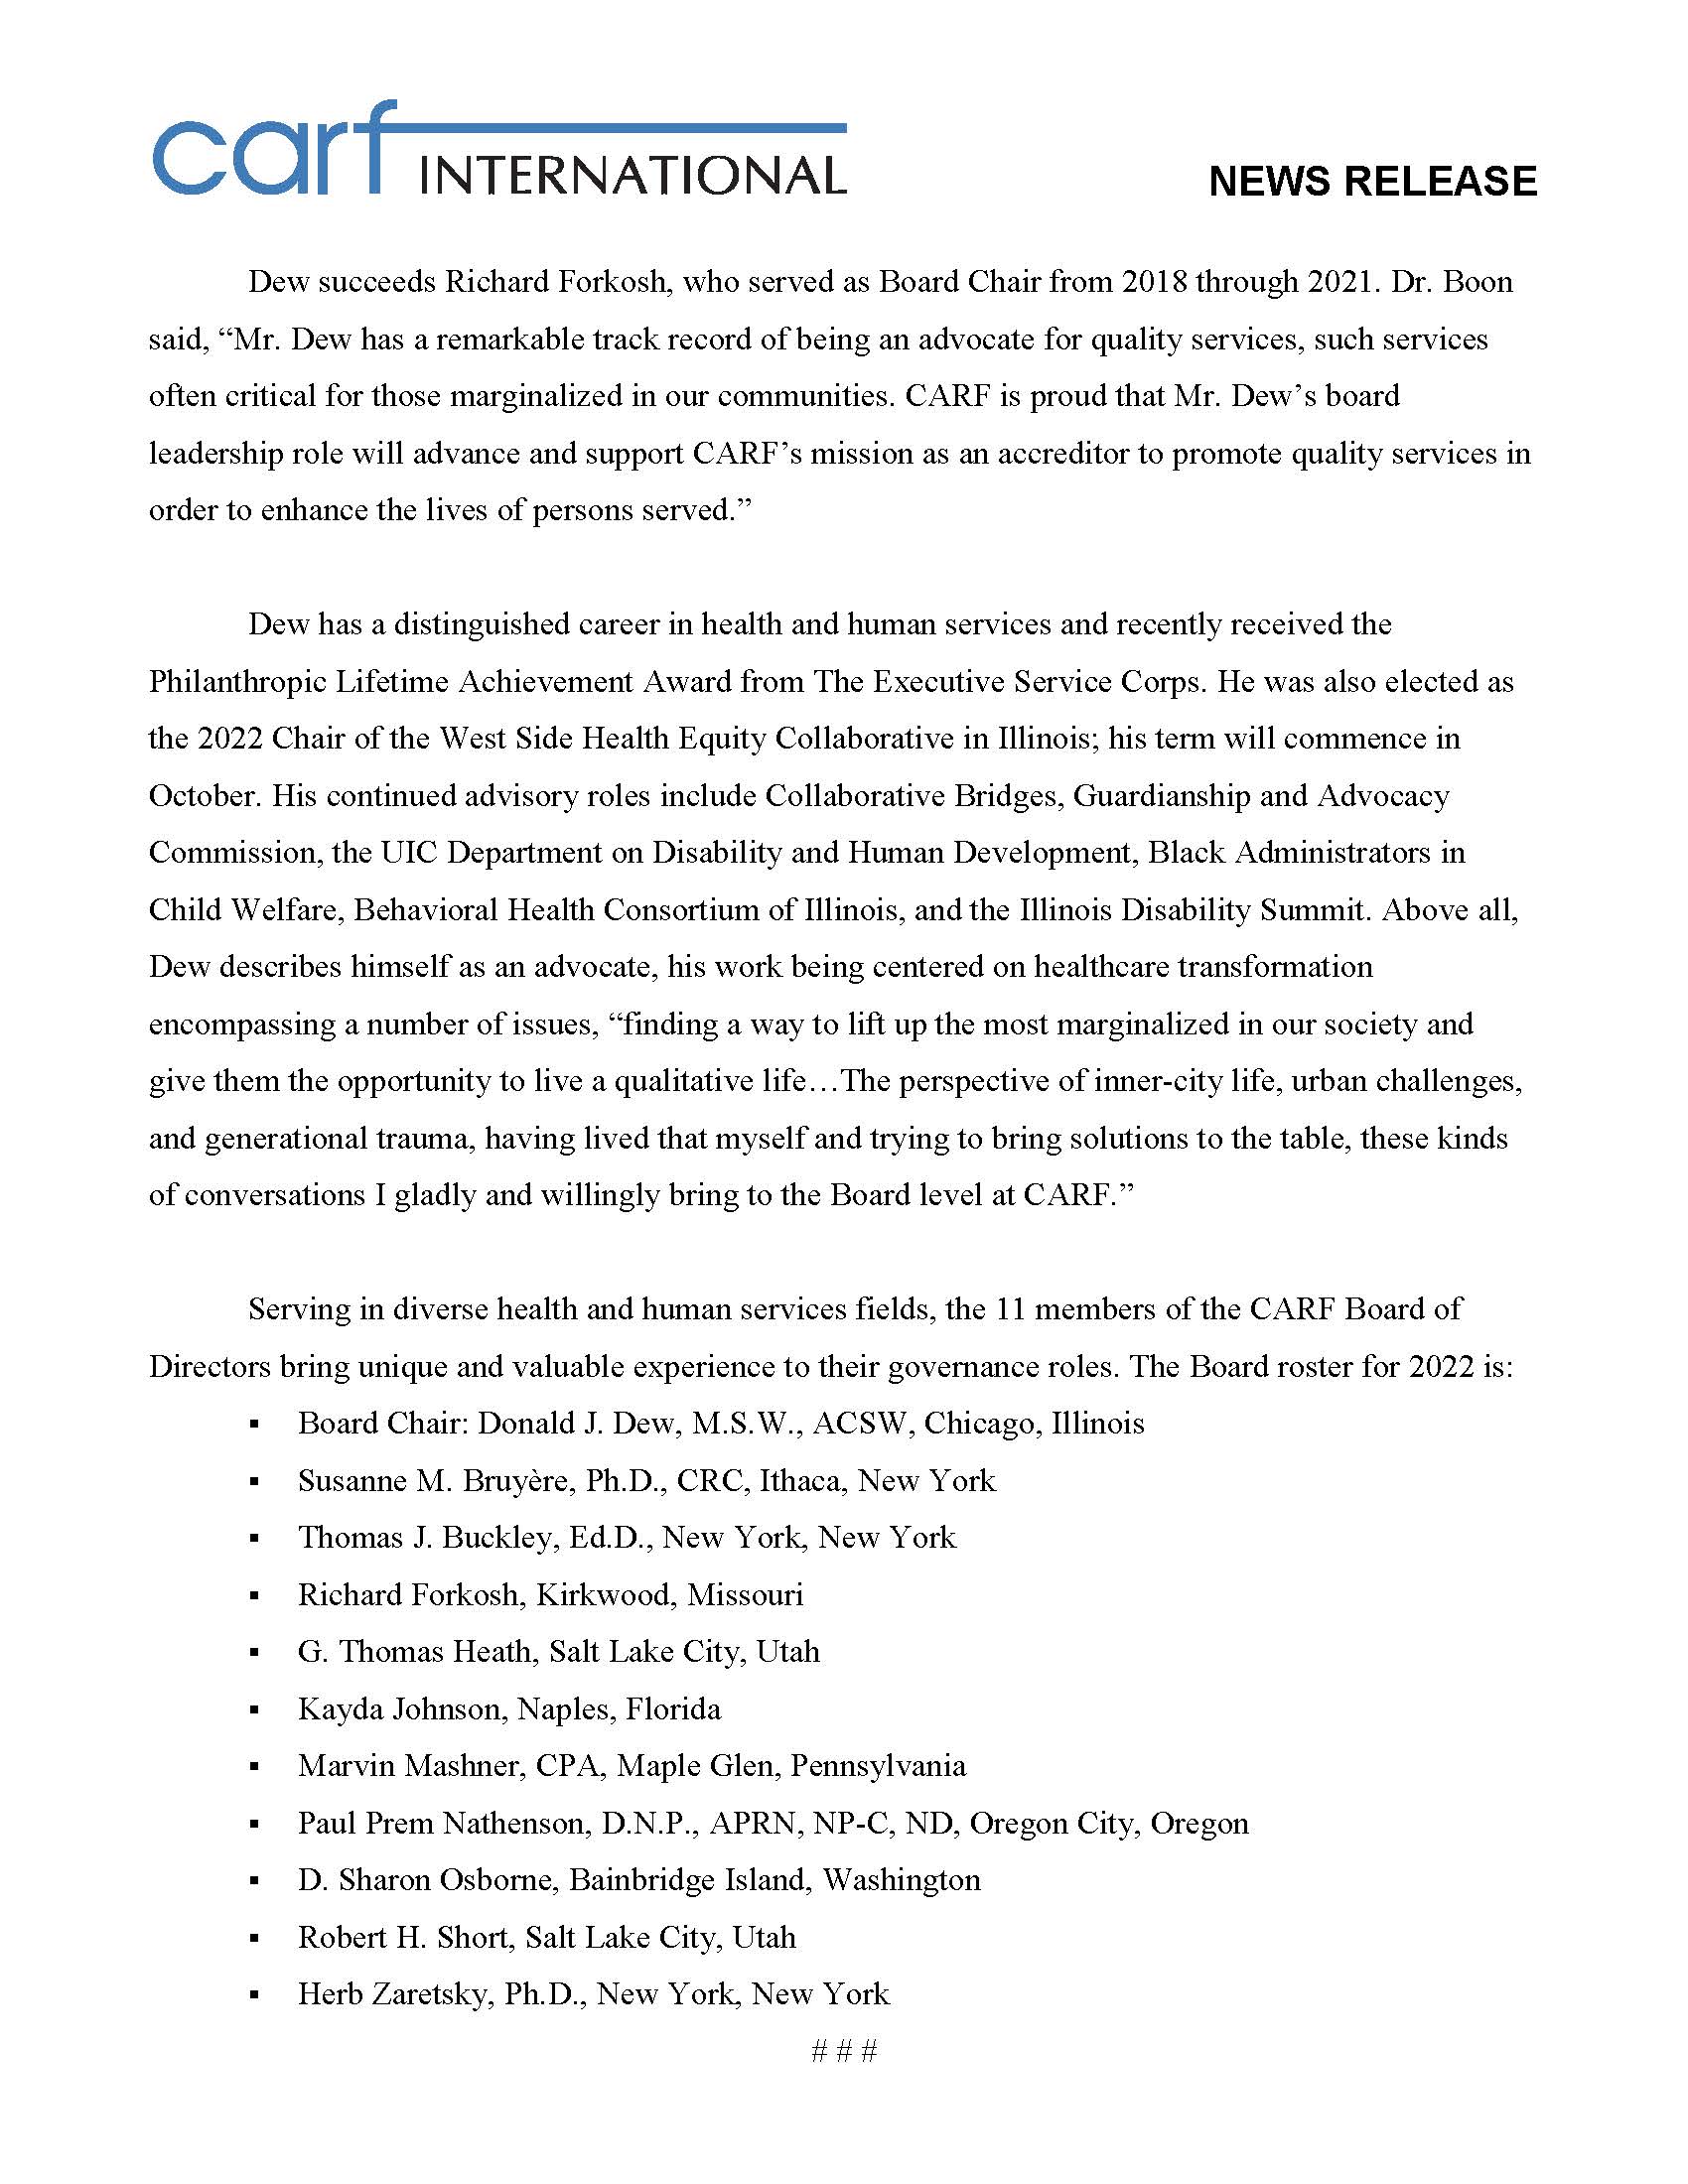 CARF International Board of Directors elects Donald Dew as Chair Page 2